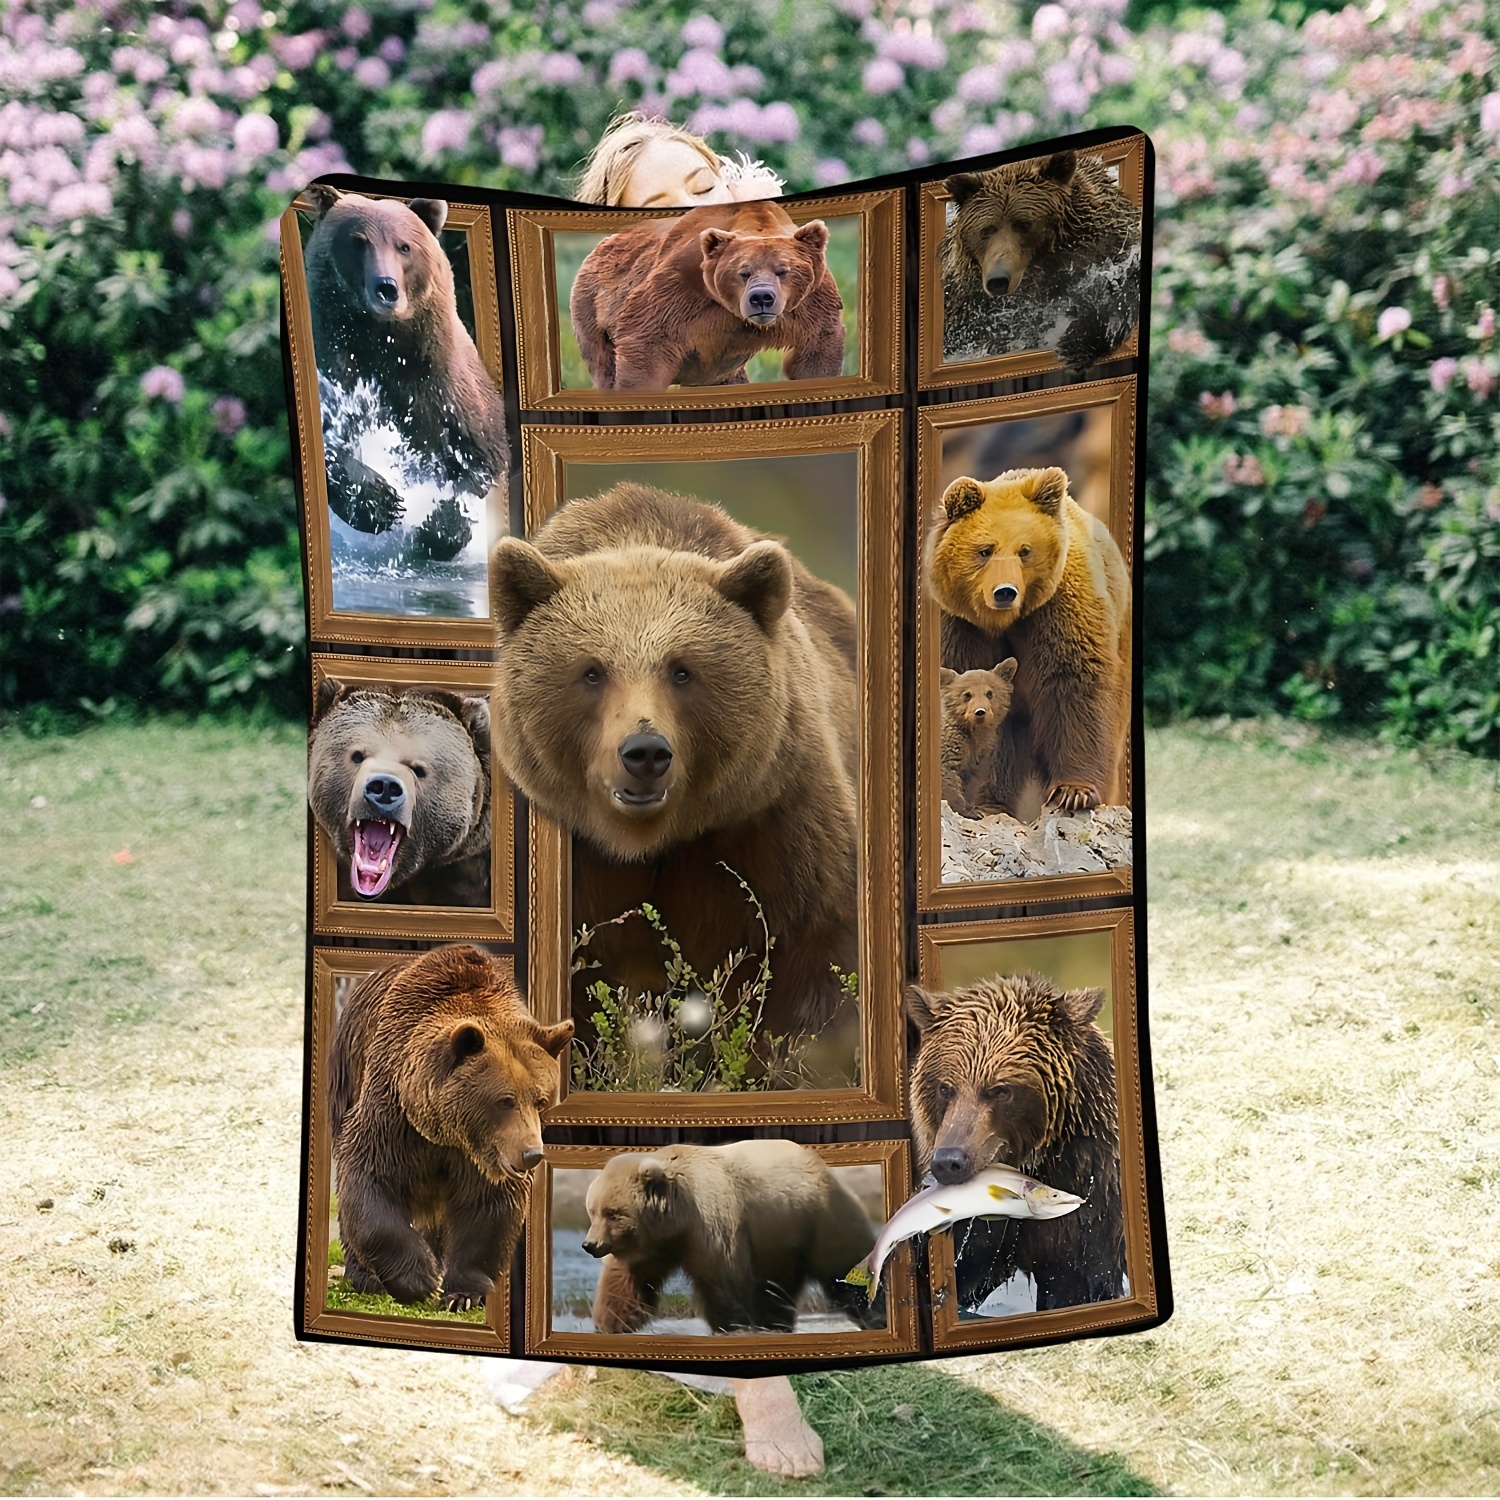 

Contemporary Animal-themed Soft Flannel Throw Blanket With Creative Brown Bear Montage Design, Cozy Knitted Polyester Sofa Cover, Versatile All-season Tv Blanket, Unique Gift For